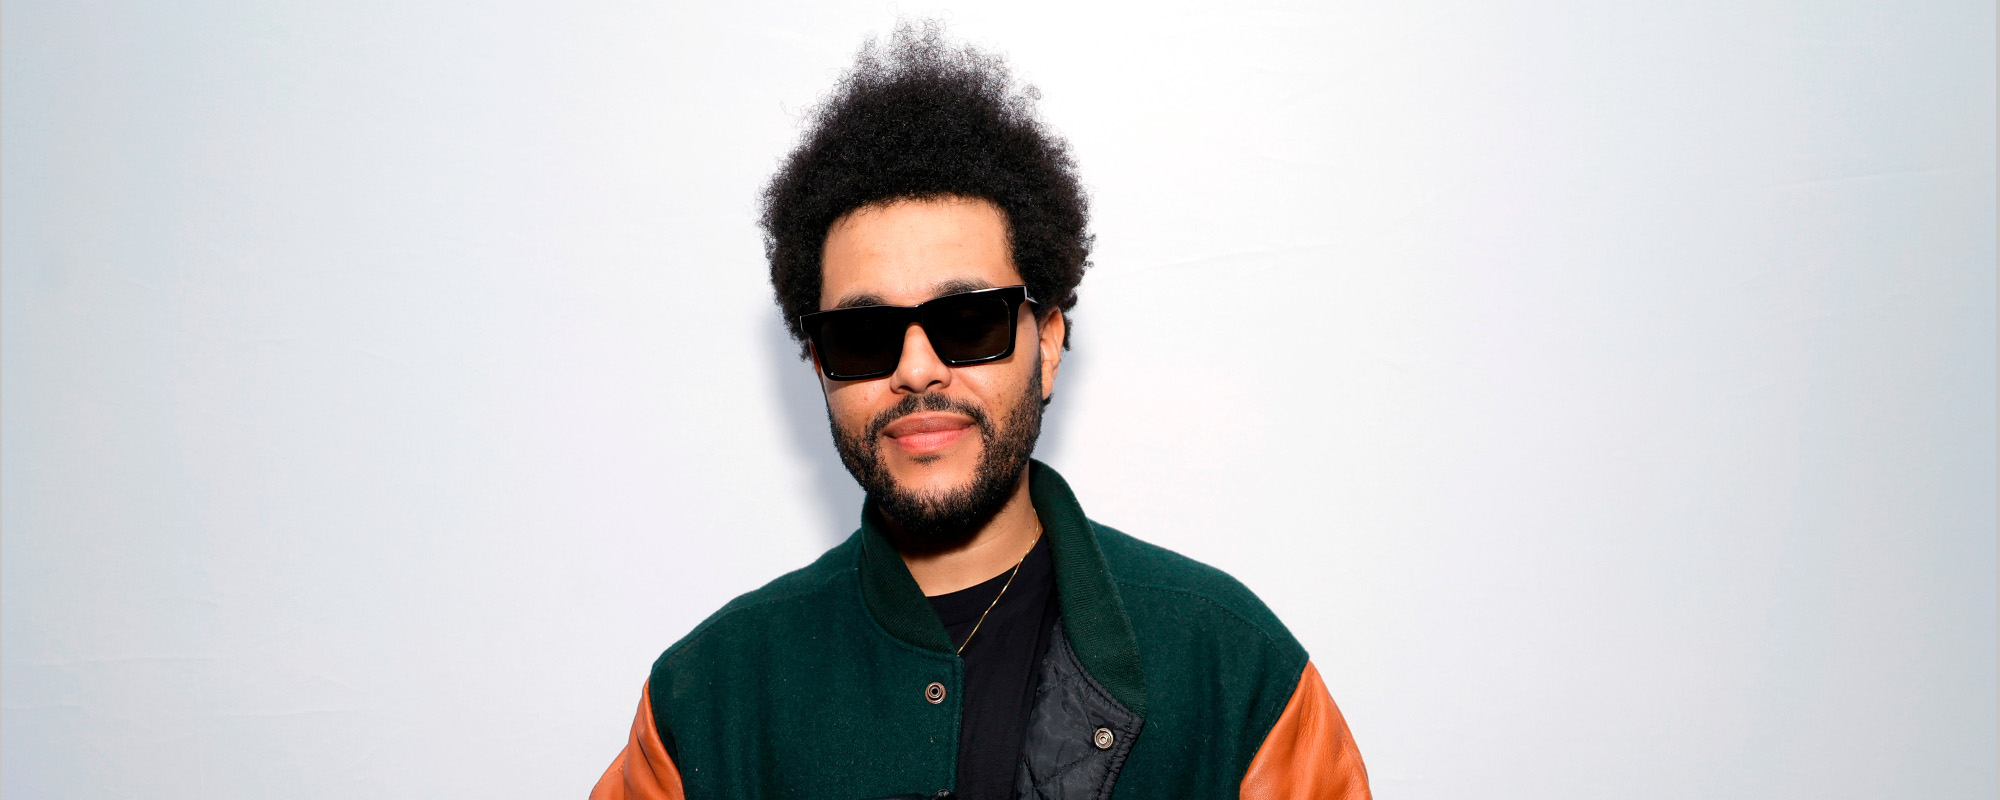 Is The Weeknd Almost Over? Singer Looks to End This Chapter of His Career